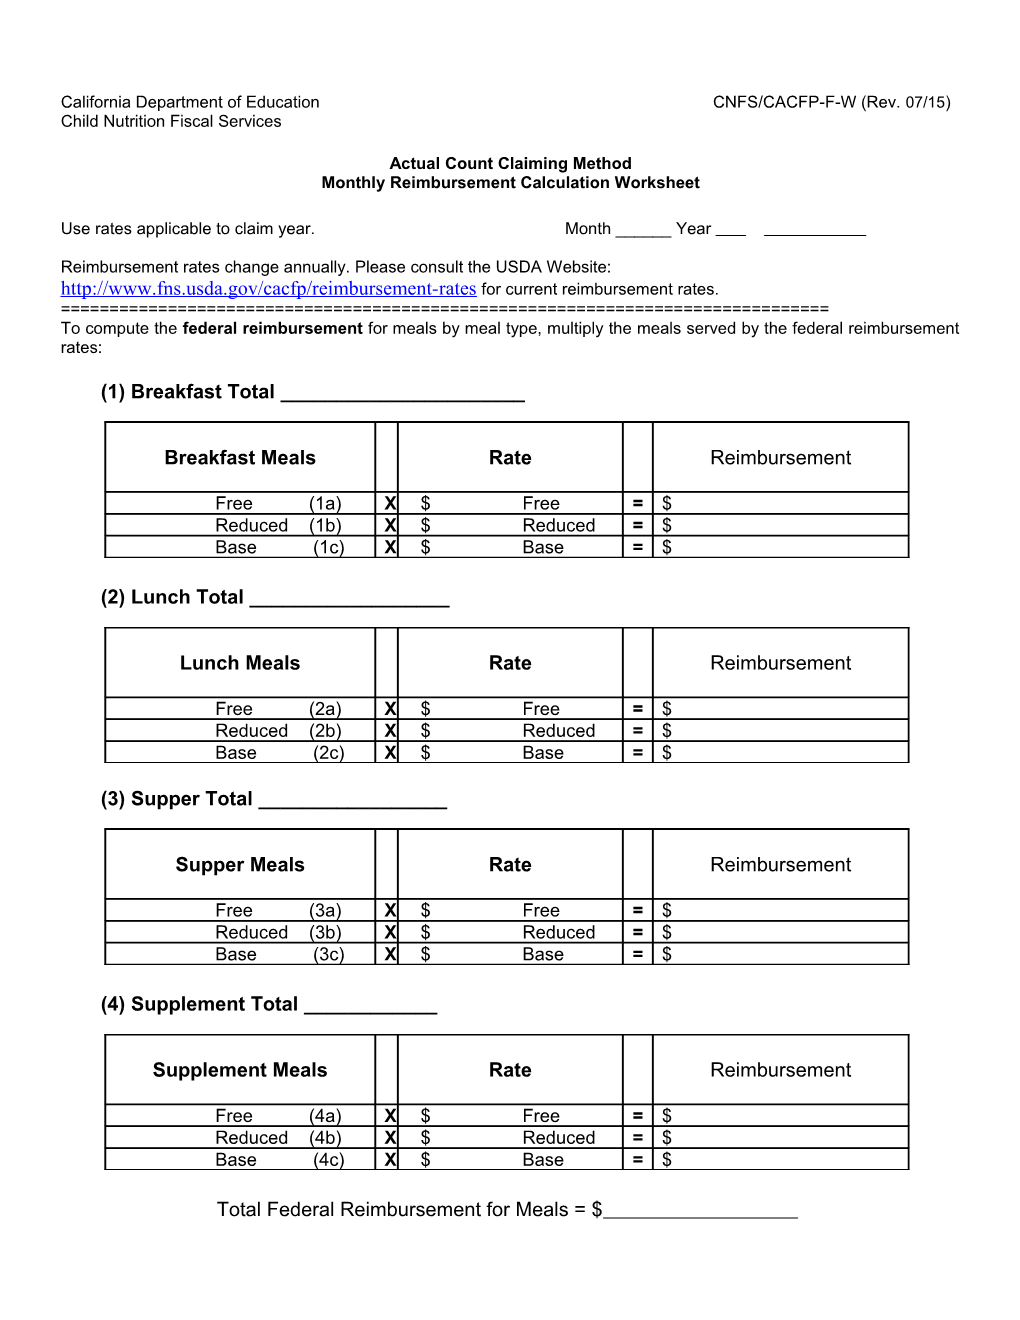 Actual Count Claiming Method Calculation Worksheet - Nutrition Services (CA Dept of Education)